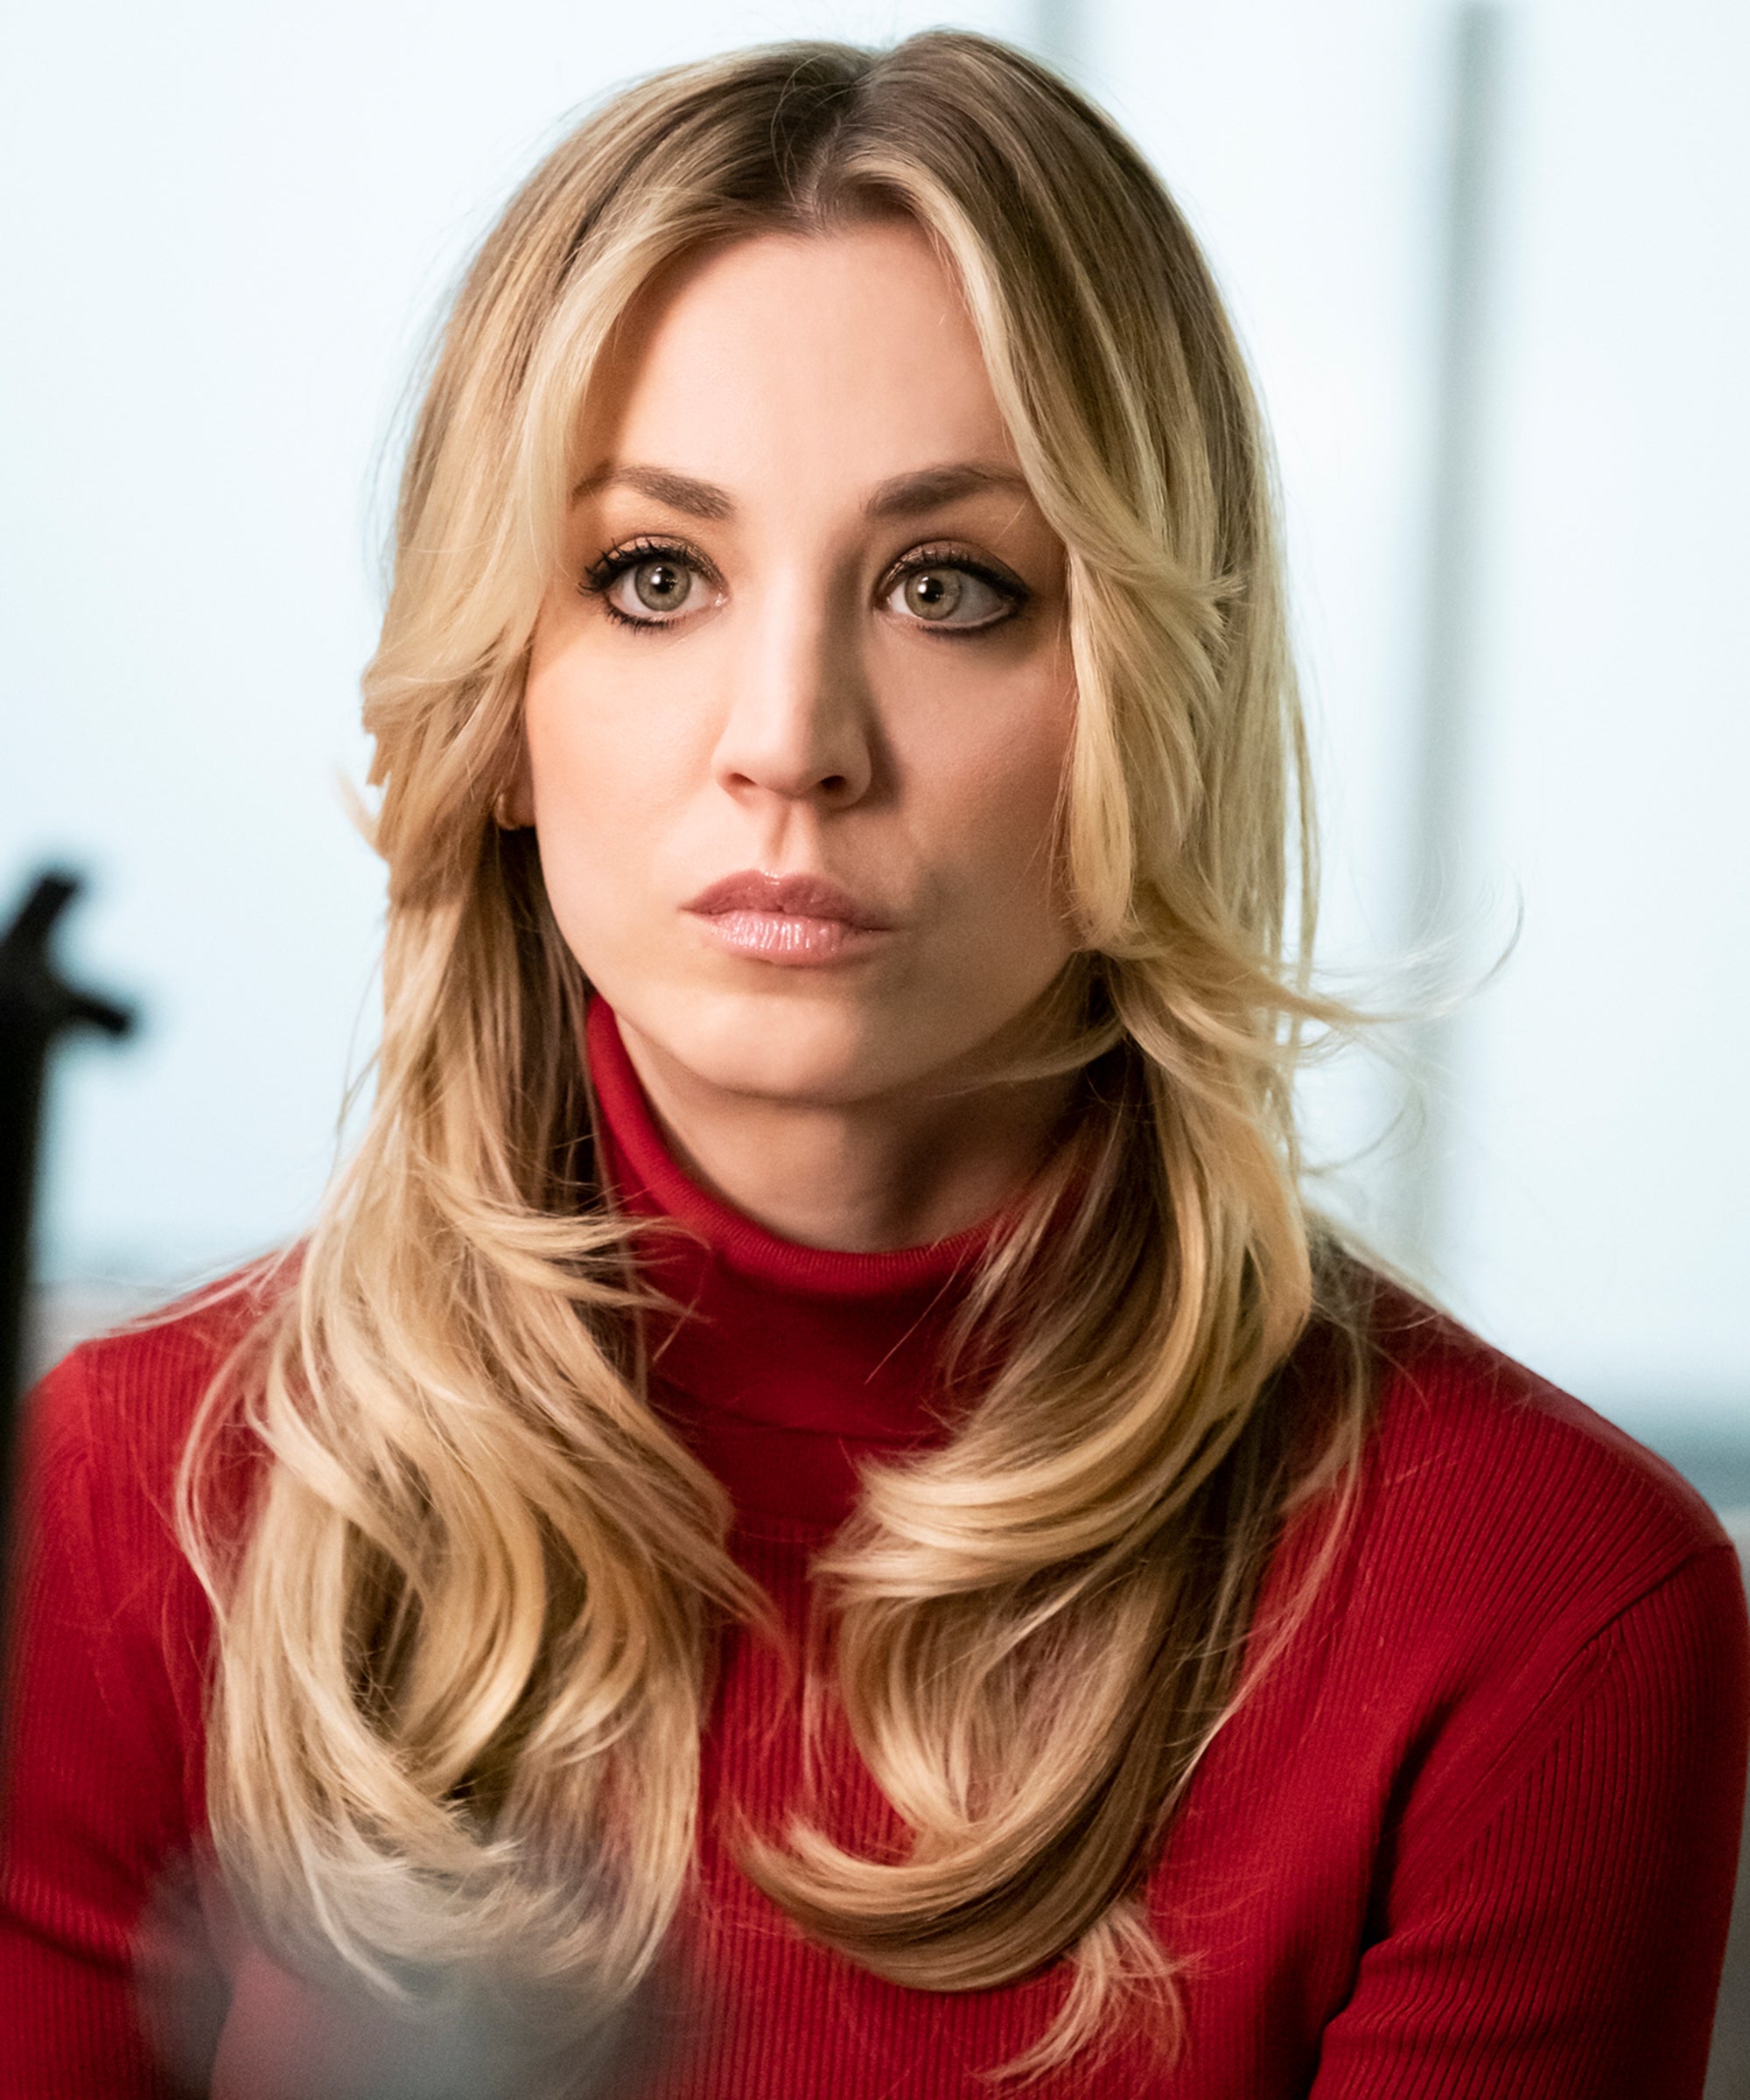 The Flight Attendant Season 2 Trailer Finds Kaley Cuoco Playing